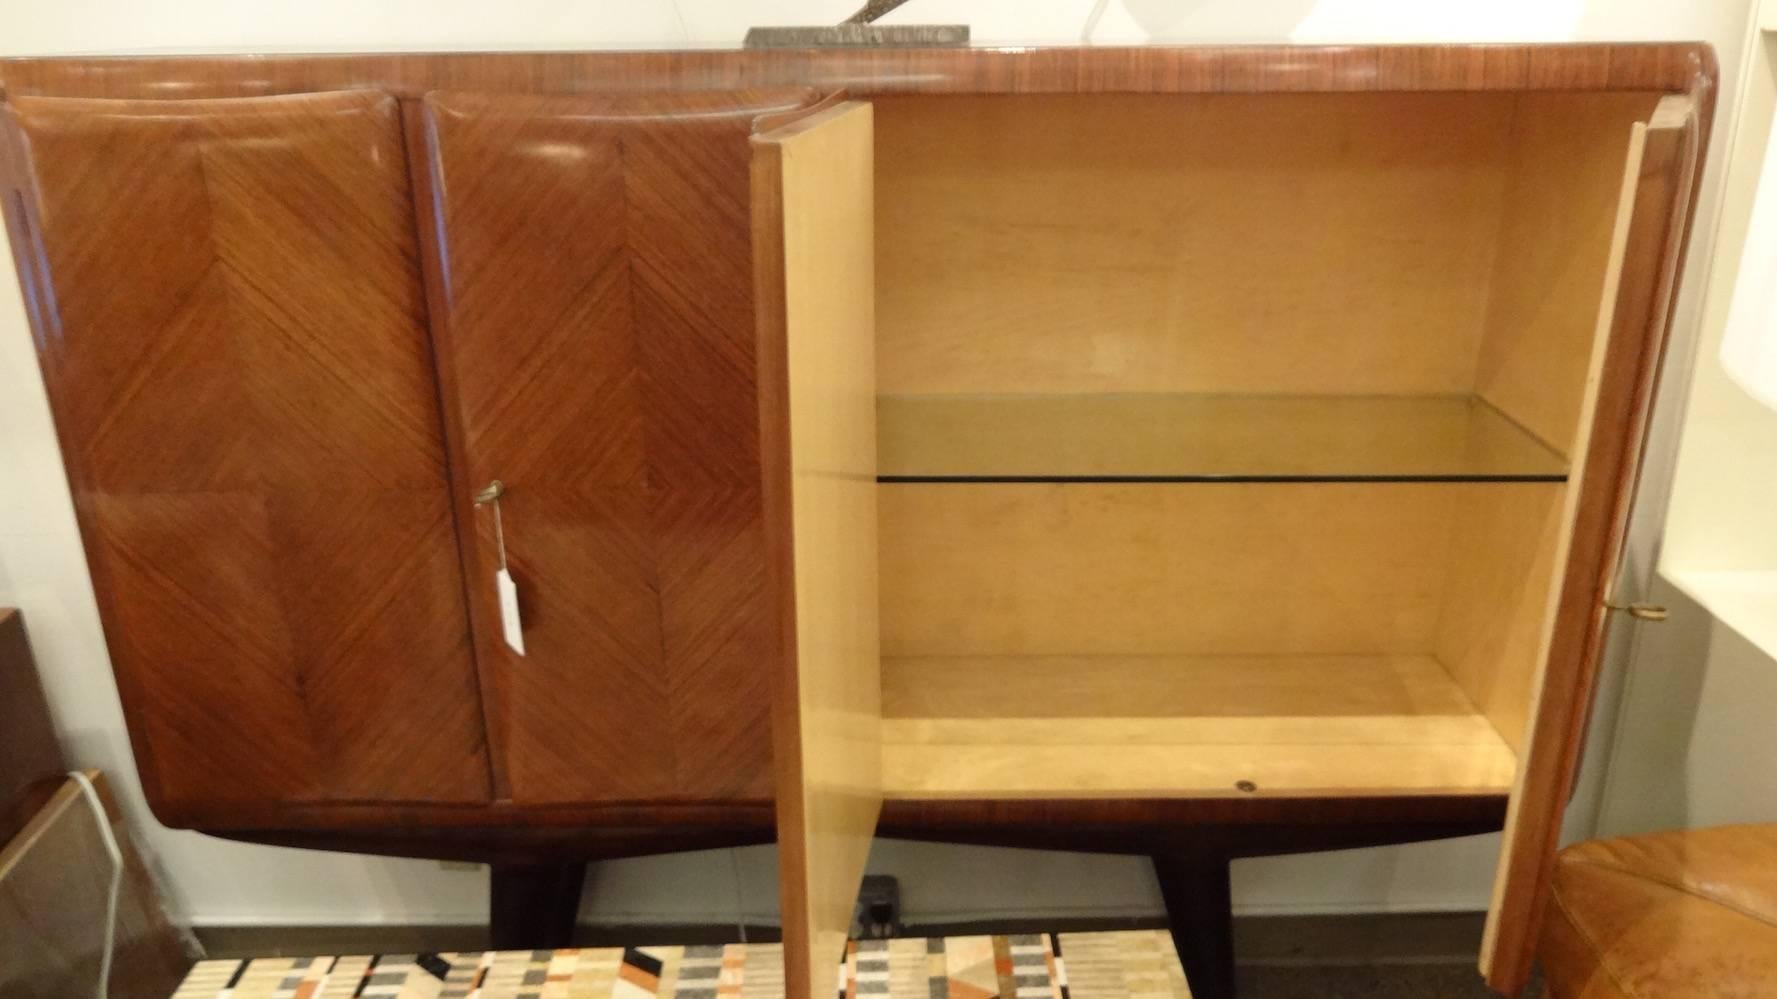 Four-Door Mid-Century Tall Cabinet in Rosewood Italy circa 1955 For Sale 4